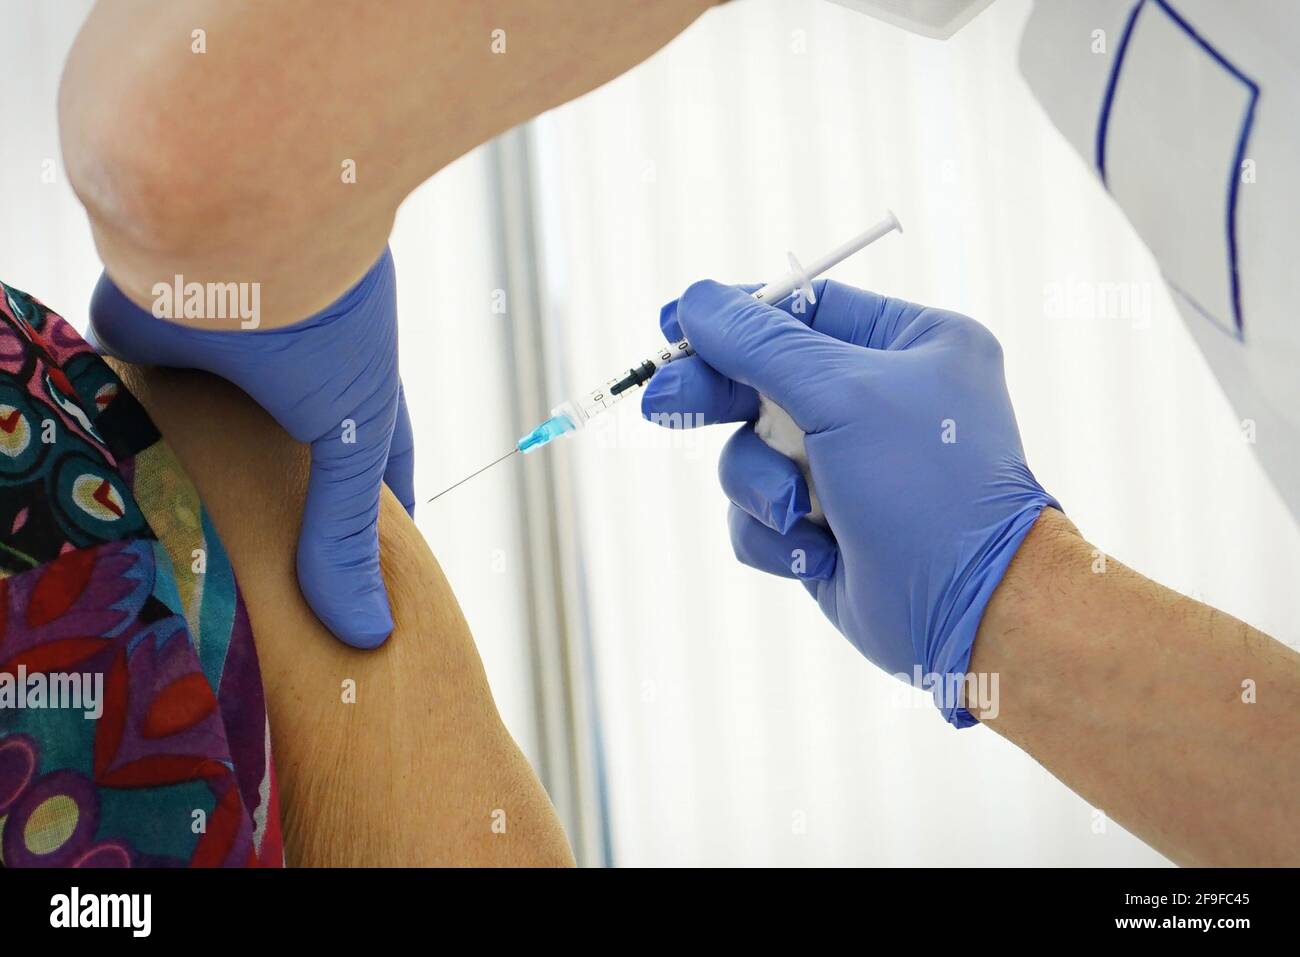 Vaccination Against Covid-19, a person receives coronavirus vaccine. Selective focus on the needle Stock Photo